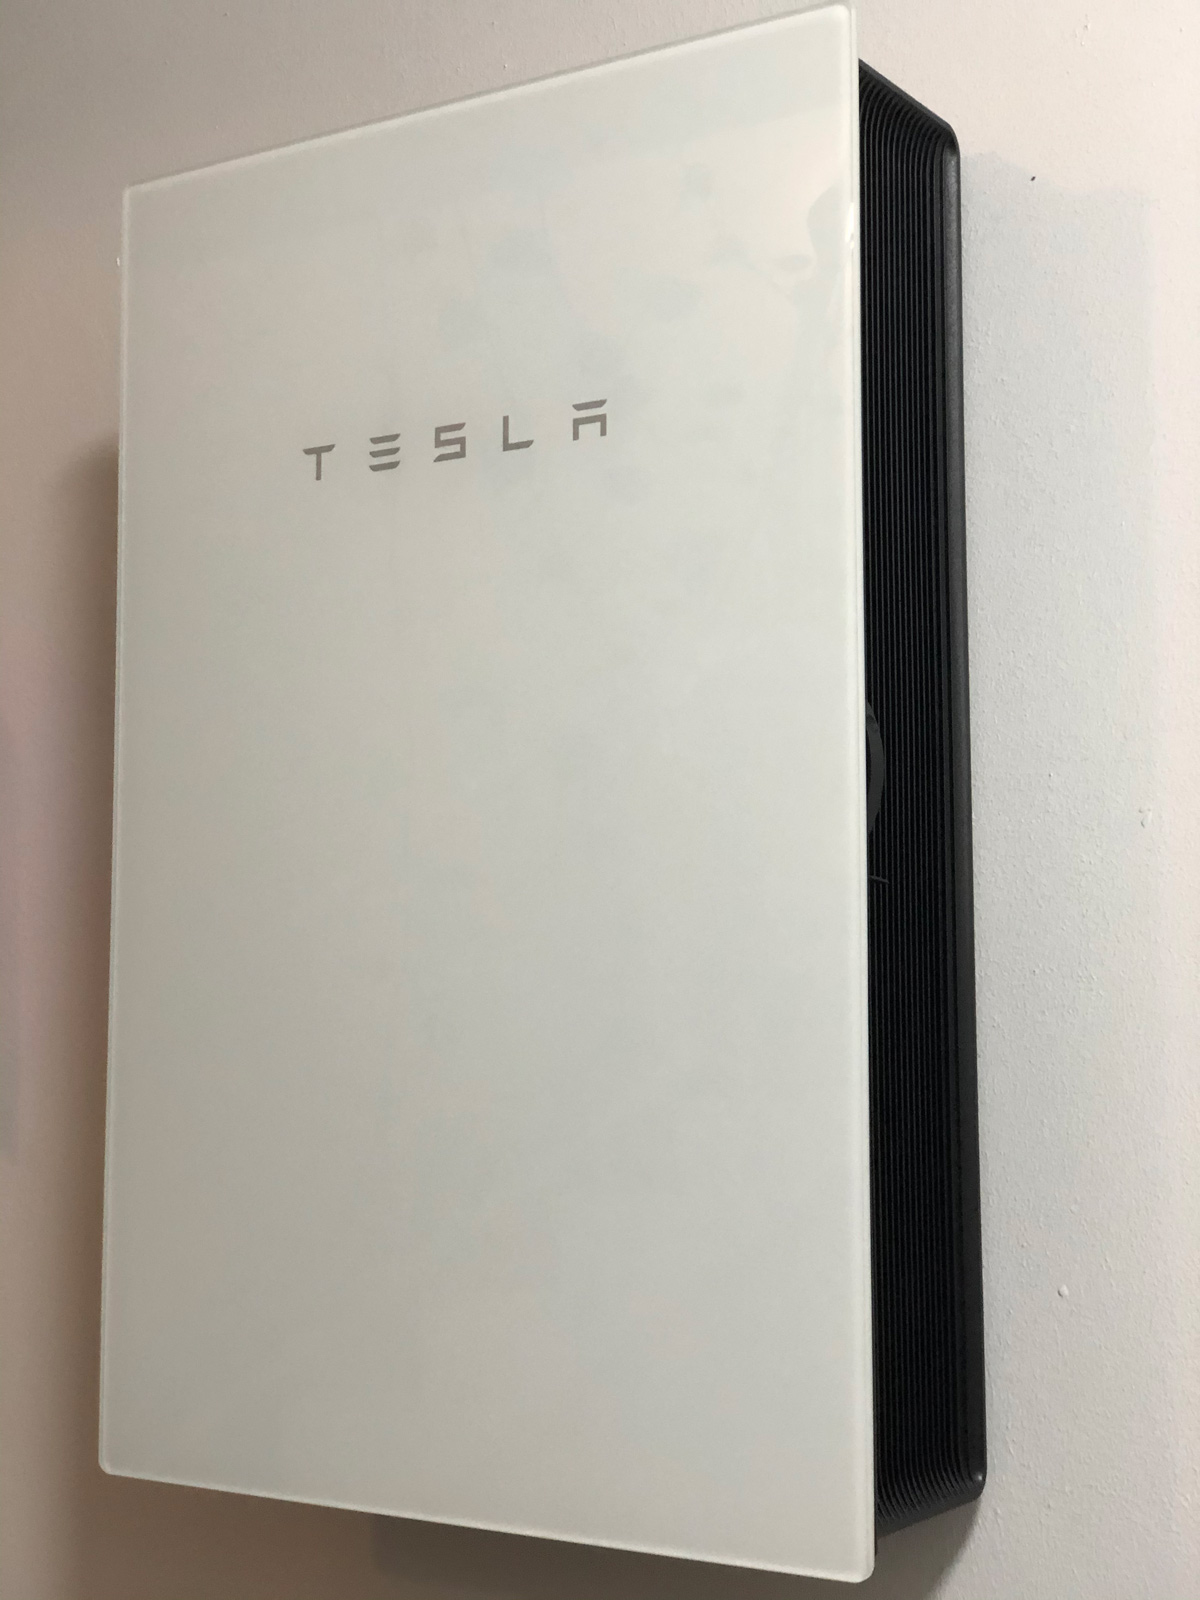 The Tesla Gateway 2 provides controls, online reporting and data downloads